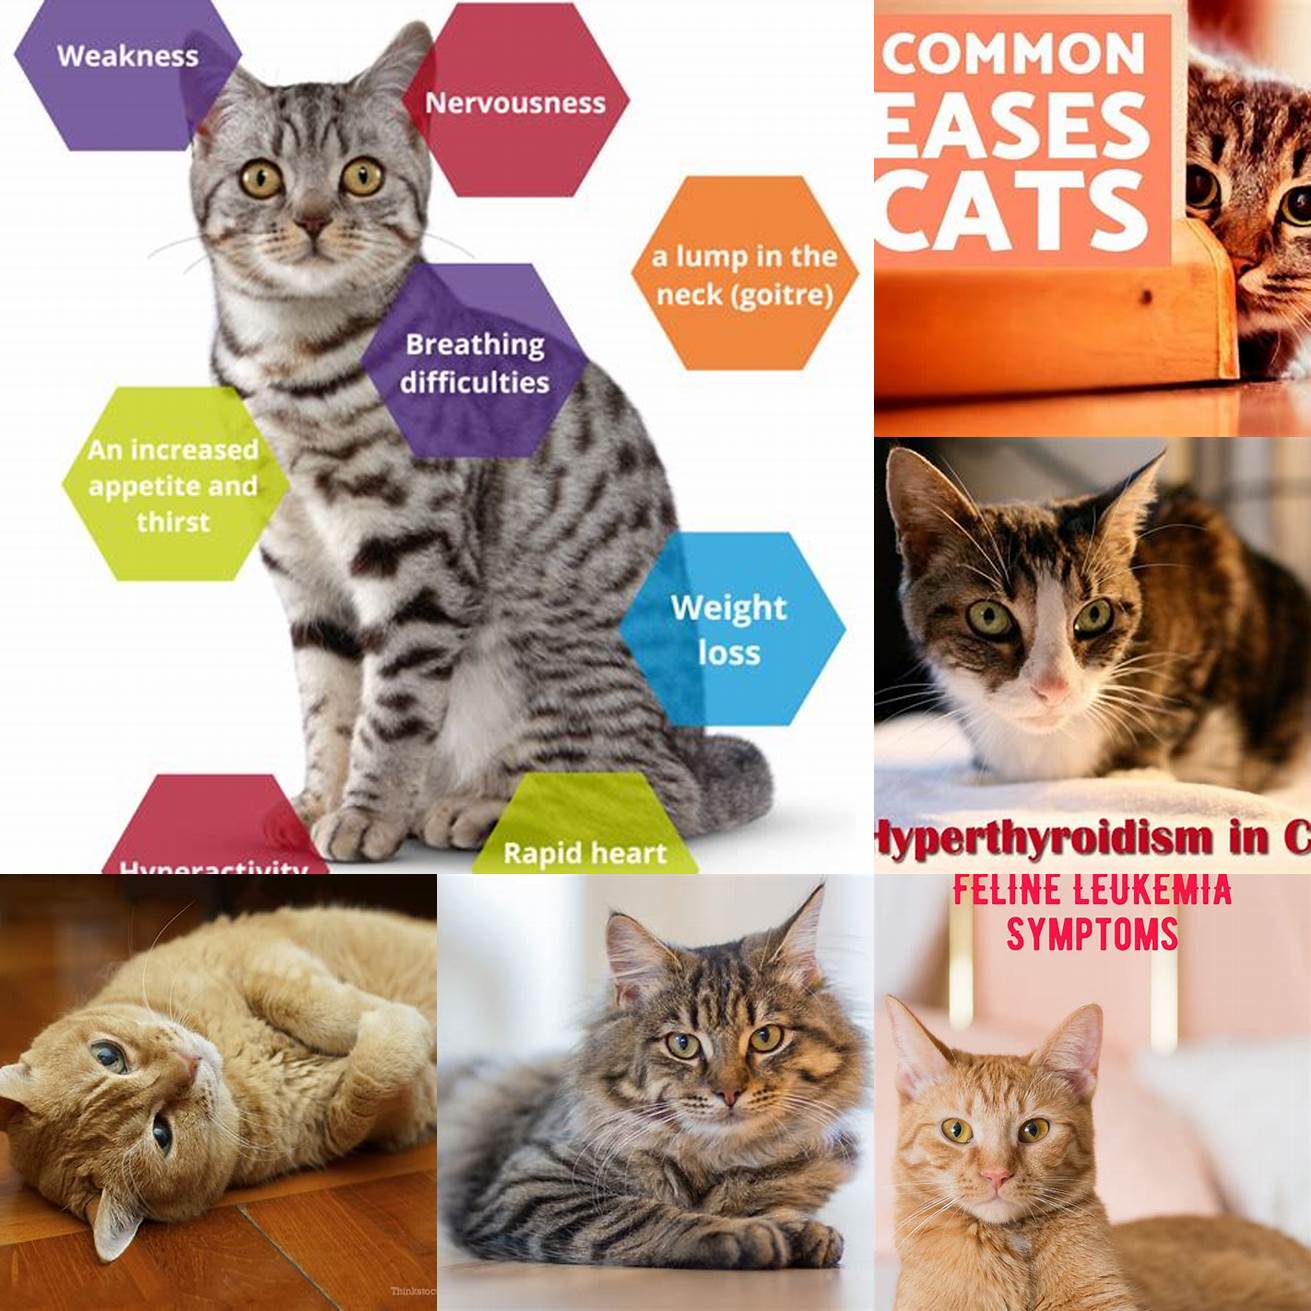 Other health conditions Cats with certain health conditions such as hyperthyroidism are at a higher risk of developing diabetes